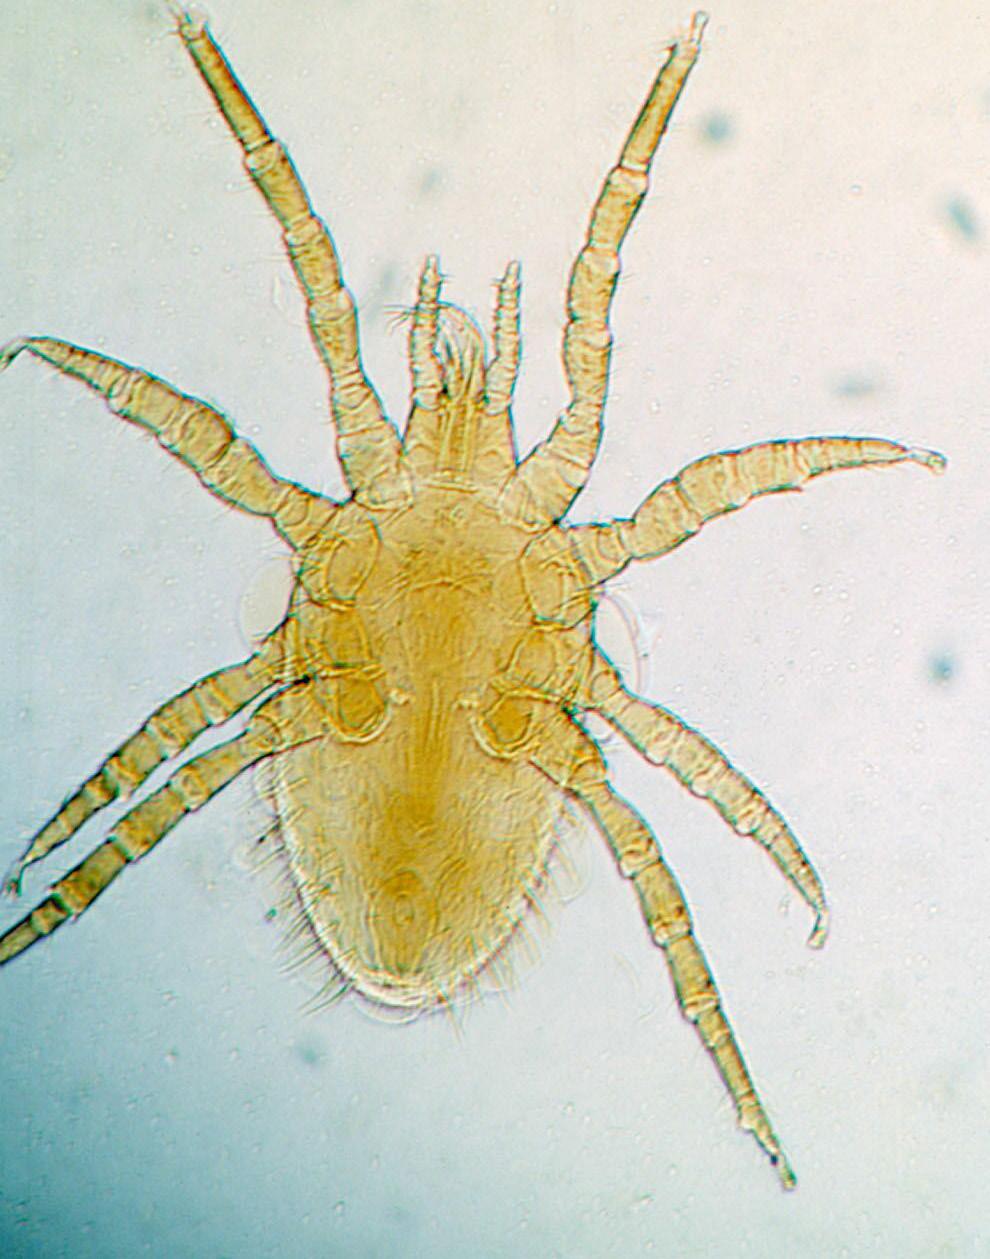 Tropical Fowl Mite The tropical fowl mite (Figure 6) is widely distributed in South America, the Caribbean and southern United States. It is a mobile species and will feed during the day or night.